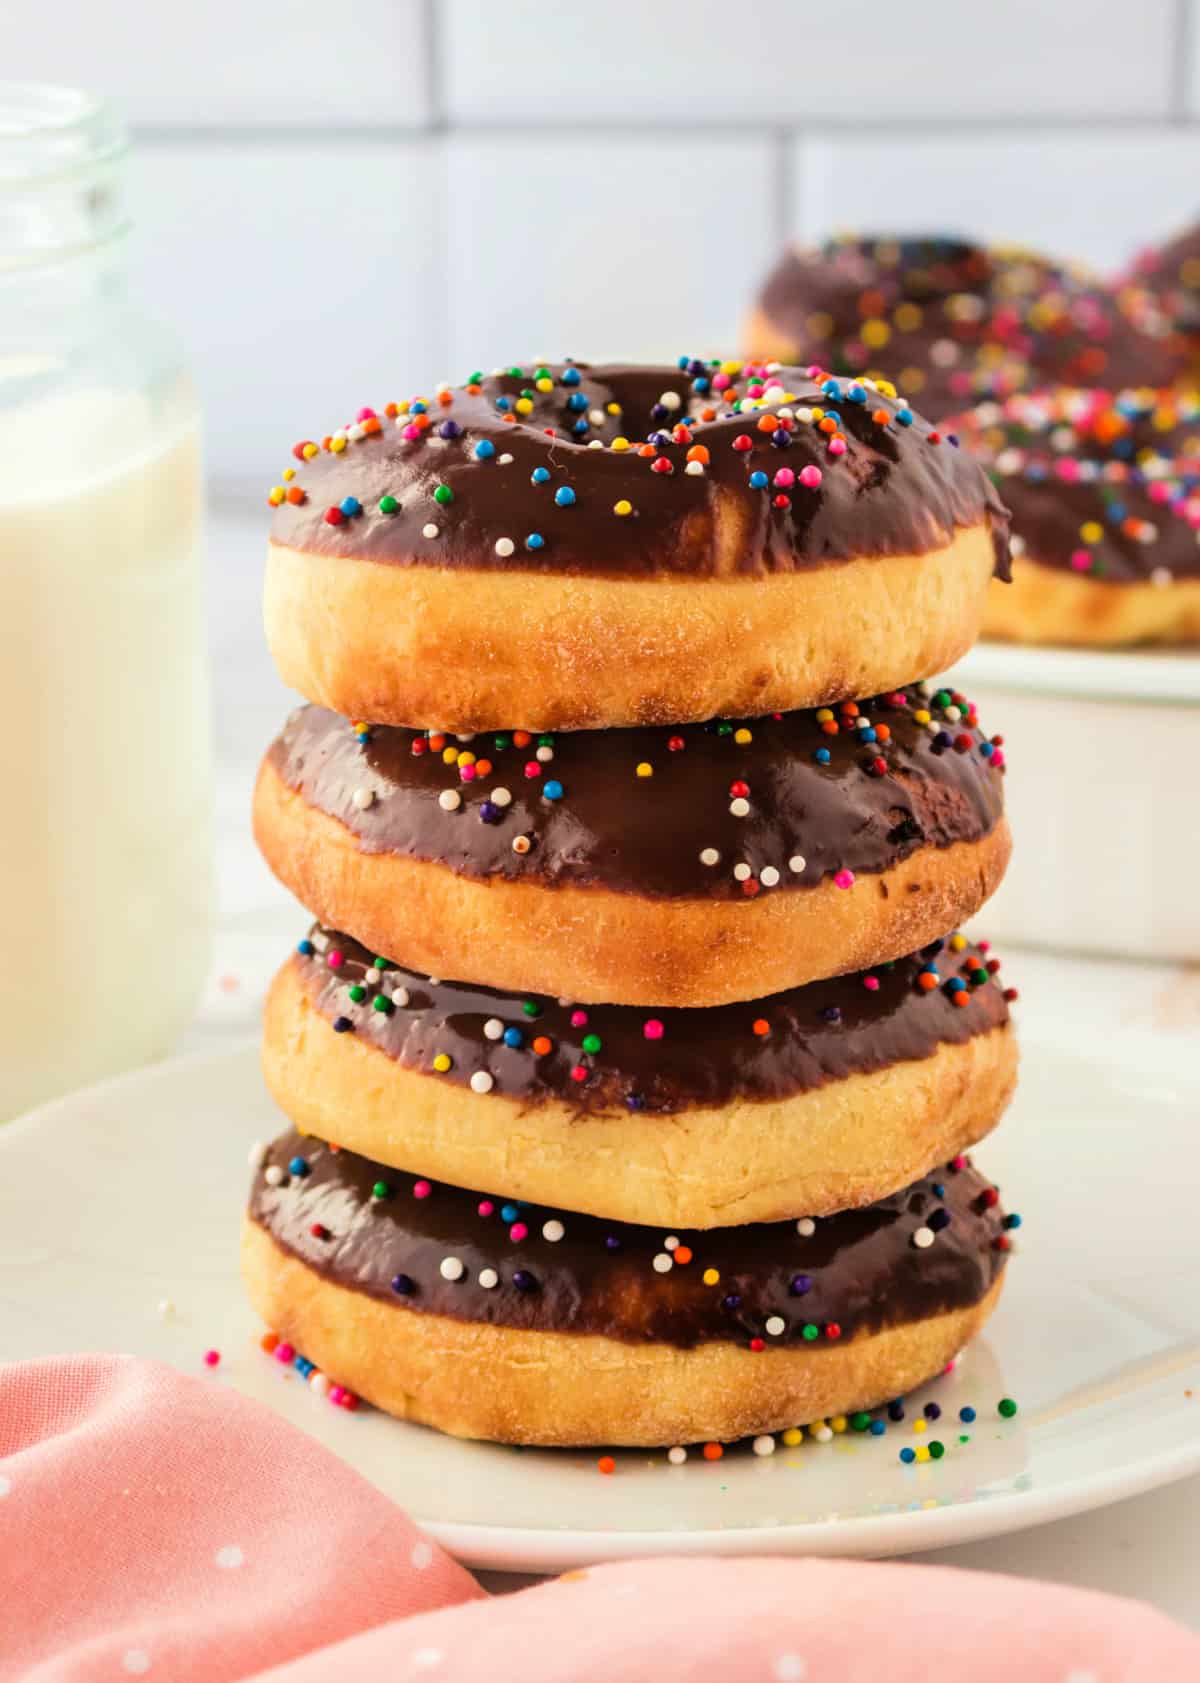 A stack of 4 air fried donuts with chocolate frosting and colorful sprinkles.